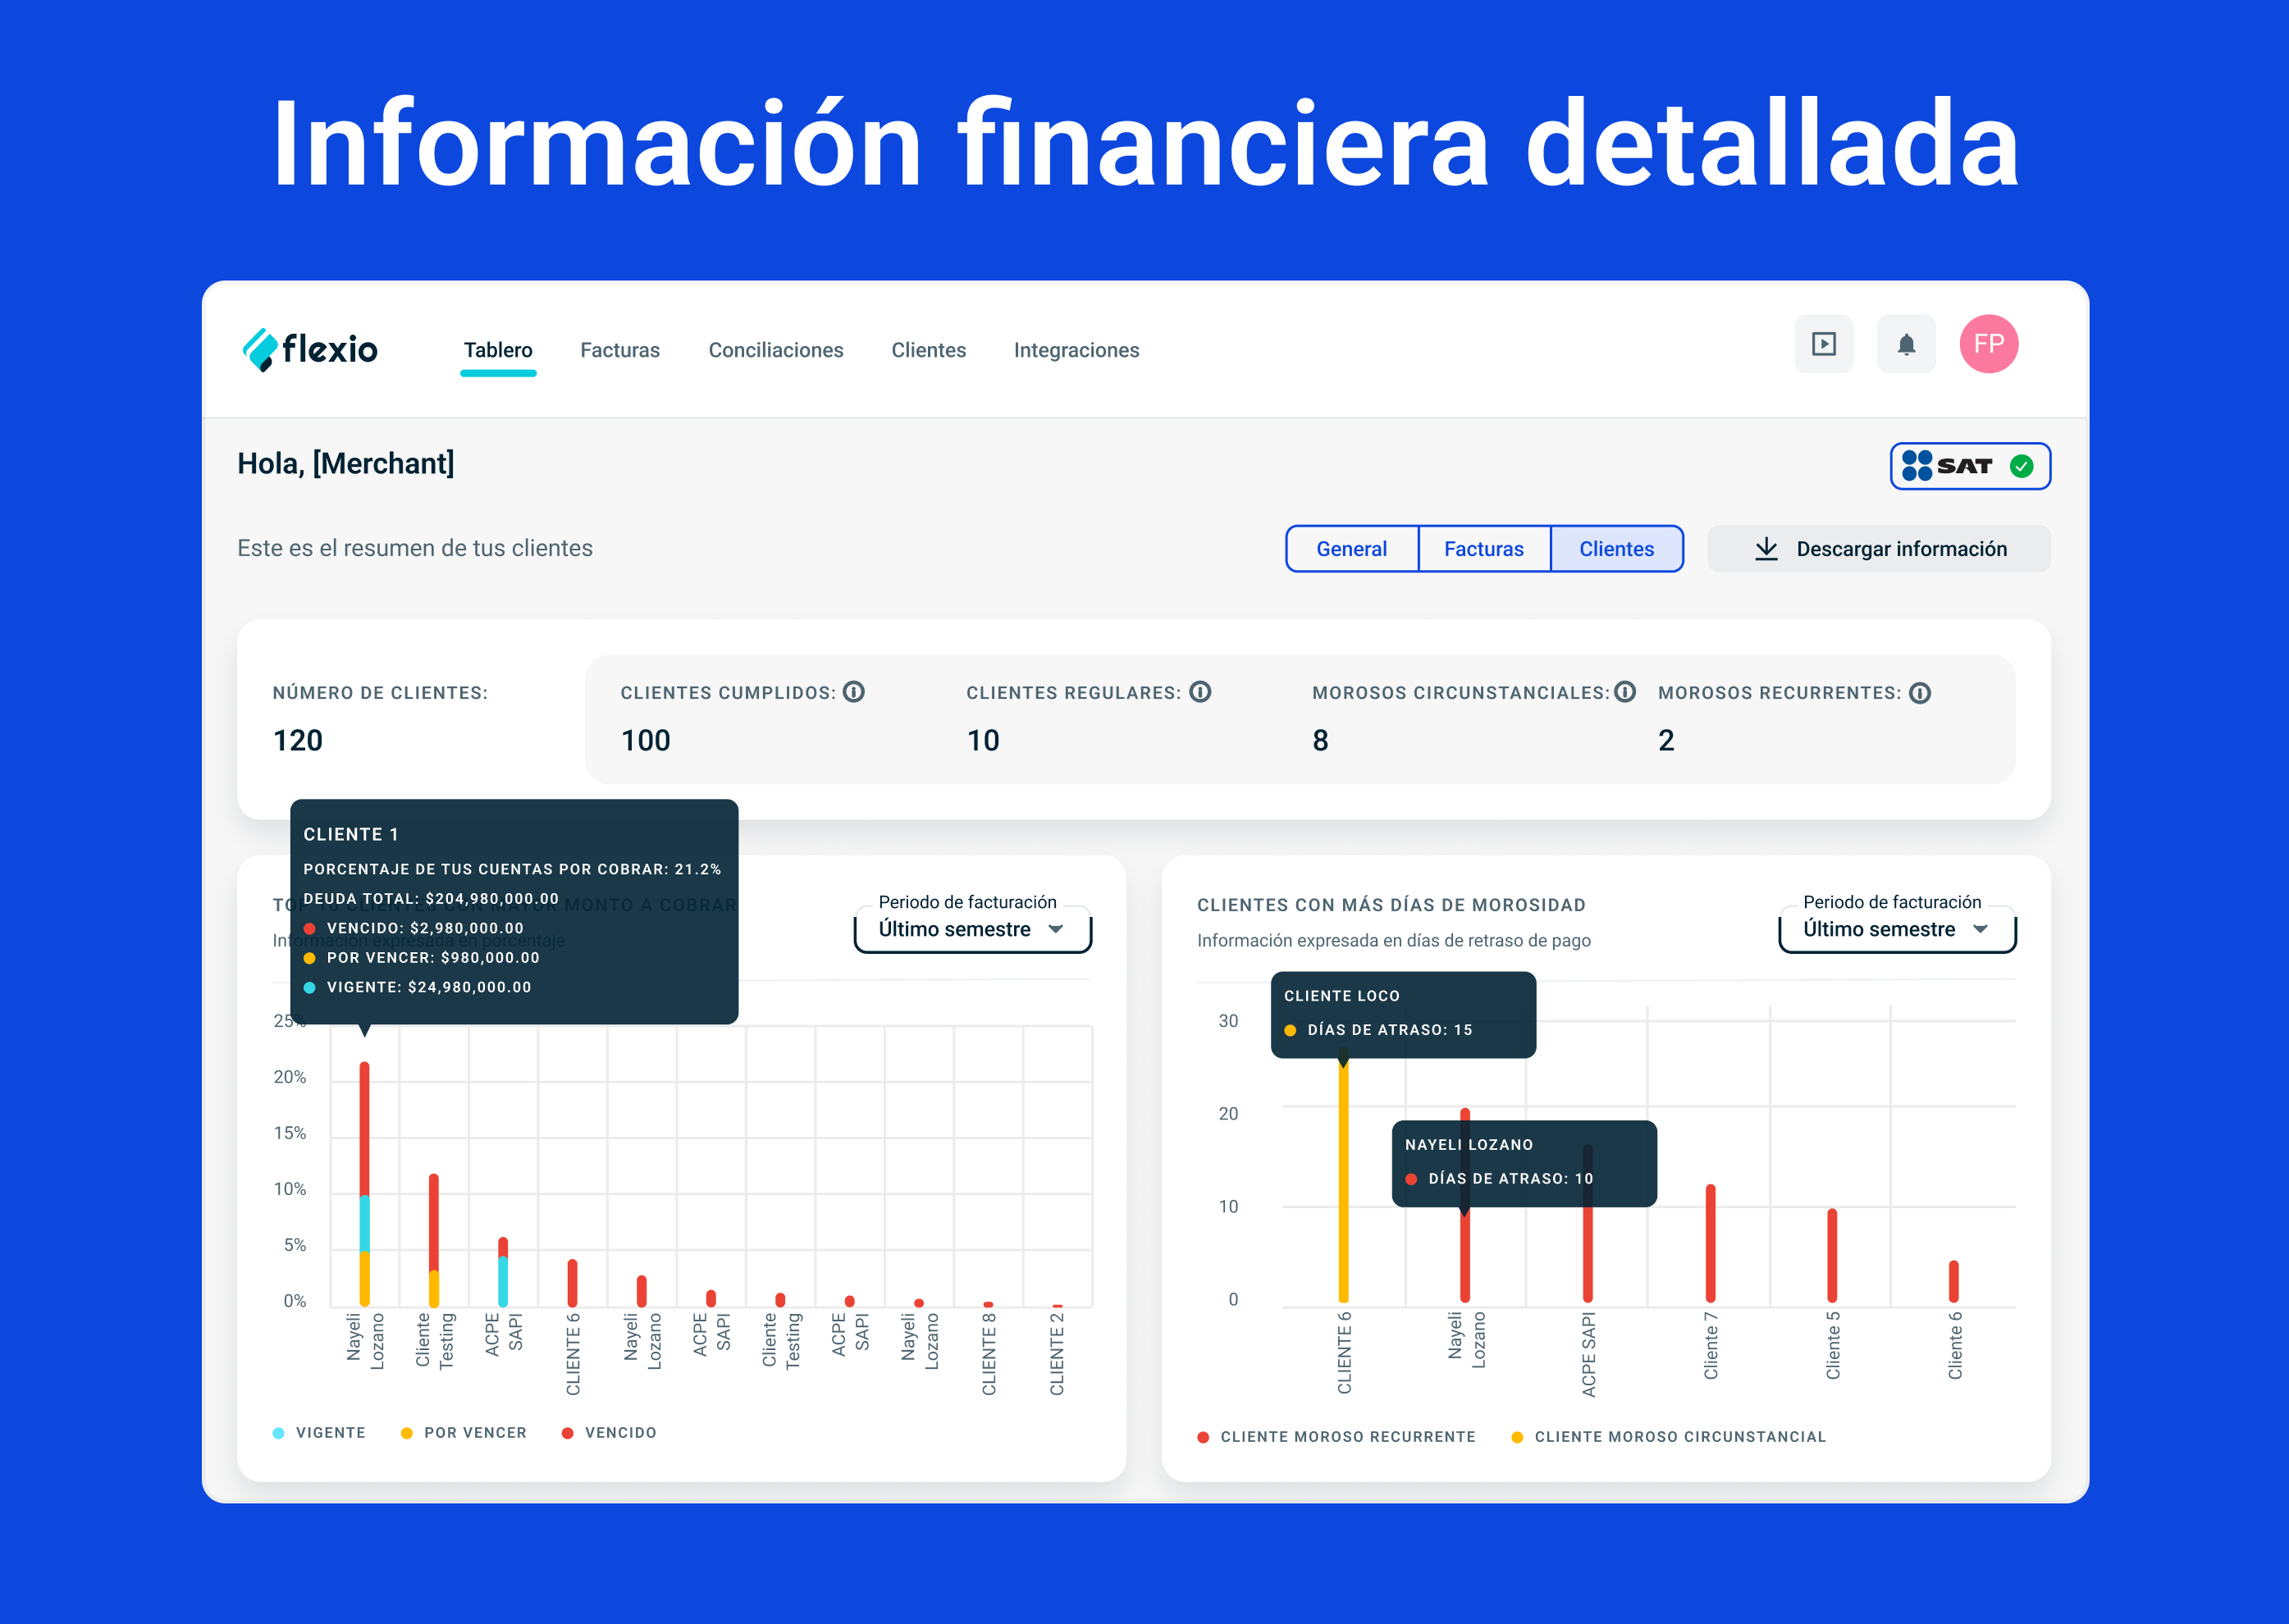 On Flexio, data visualization is easy and in real-time. Get detailed information and know the status of your collections through visual reports that provide you with everything you need to know.